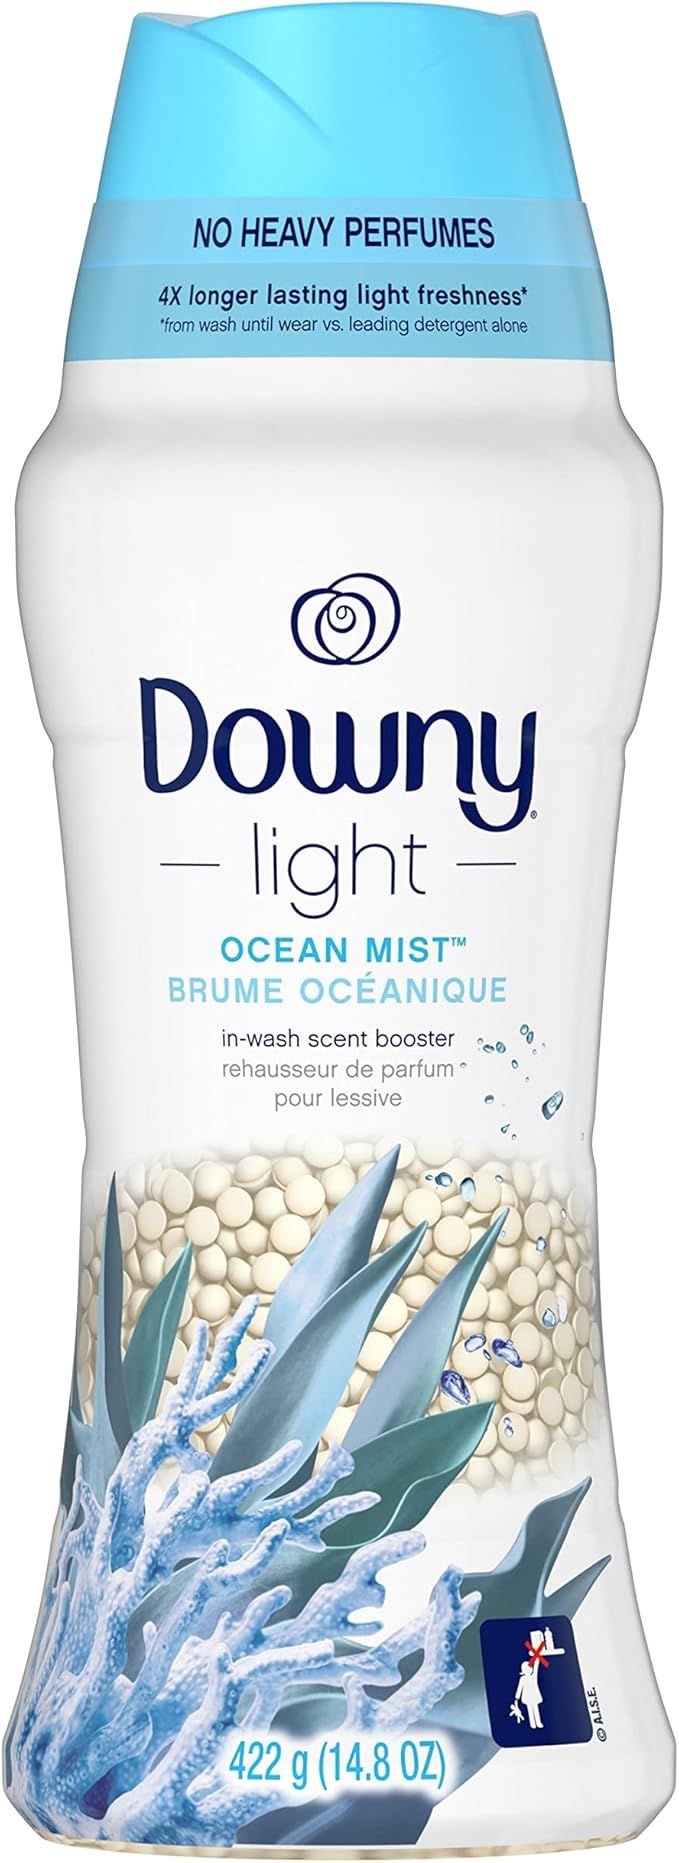 Downy Light Laundry Scent Booster Beads for Washer, Ocean Mist, 14.8 oz, with No Heavy Perfumes | Amazon (US)